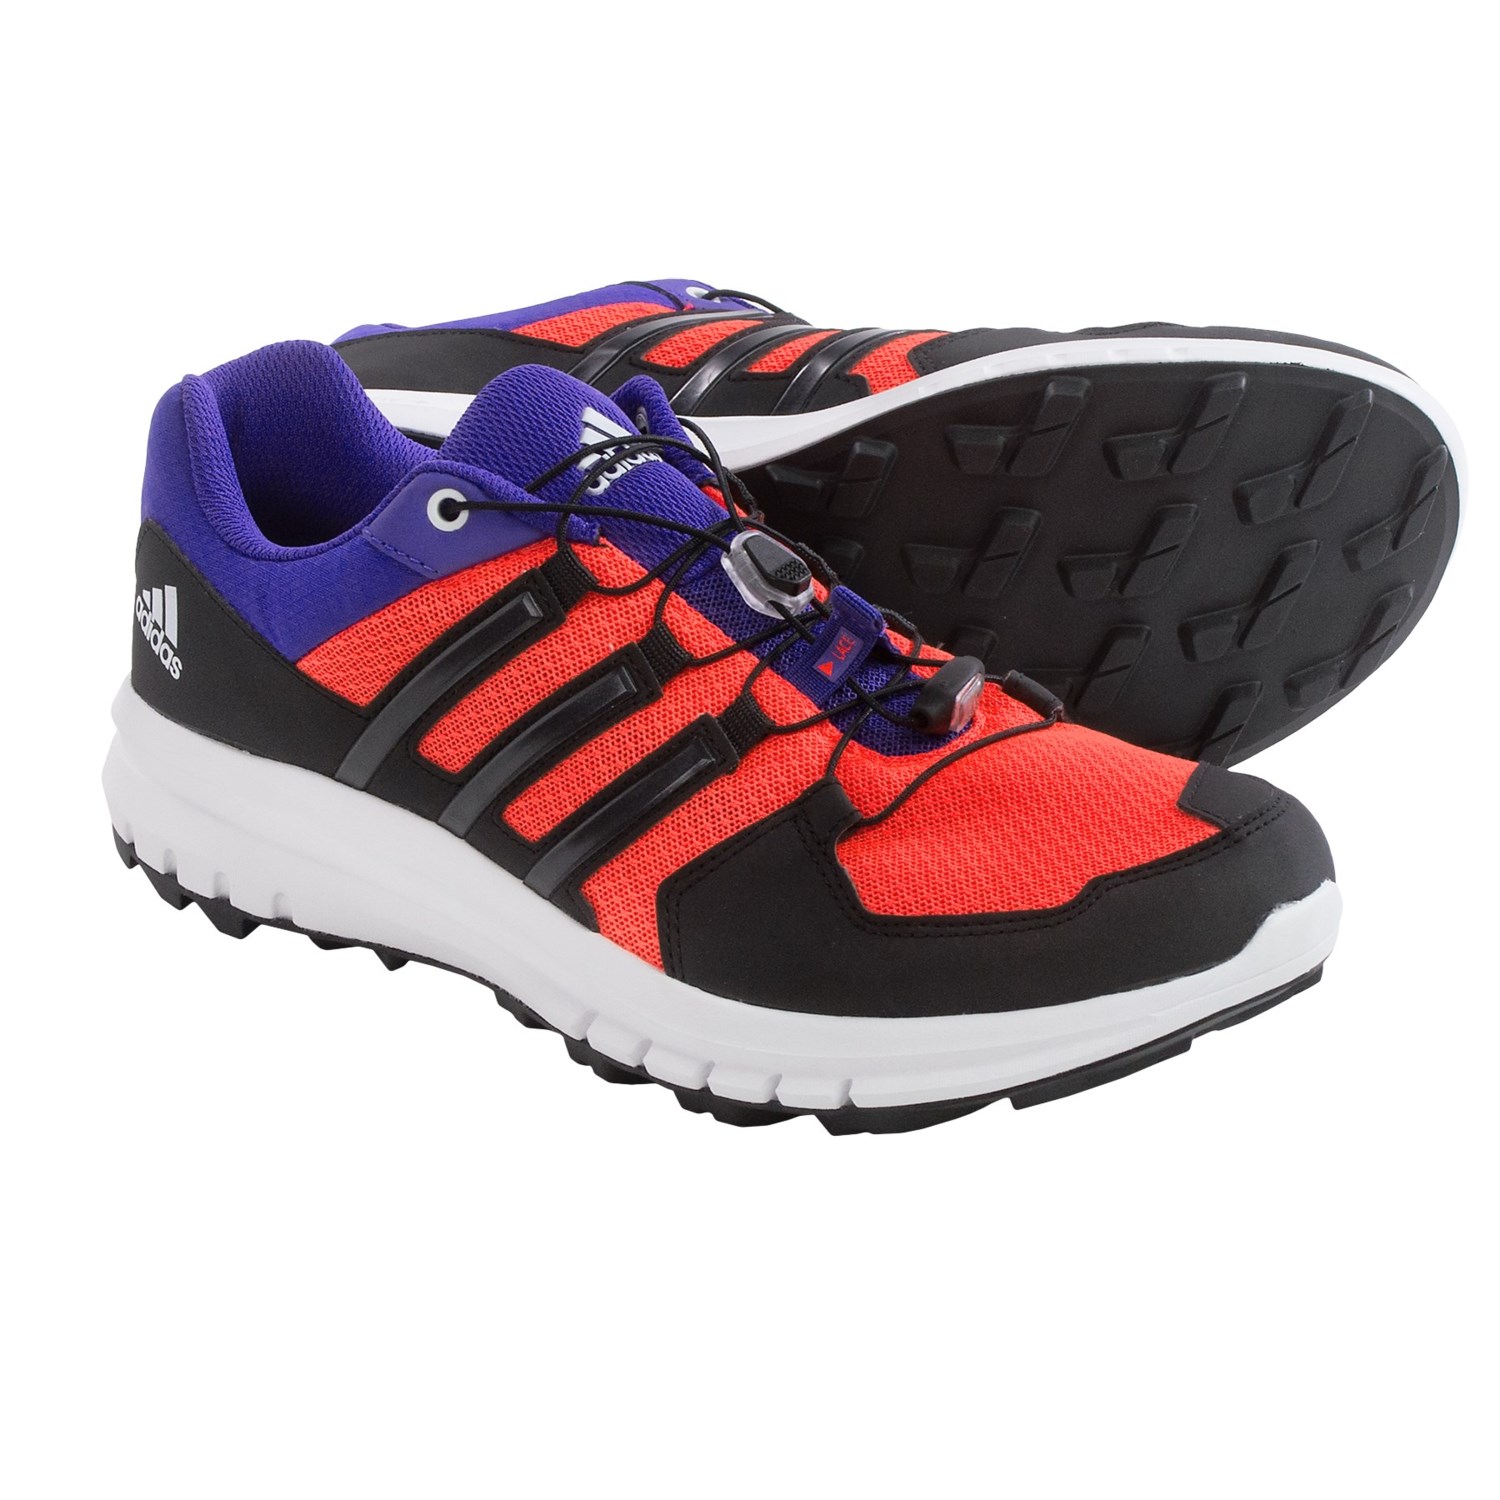 adidas outdoor Duramo Cross Trail Running Shoes (For Men) - Save 53%